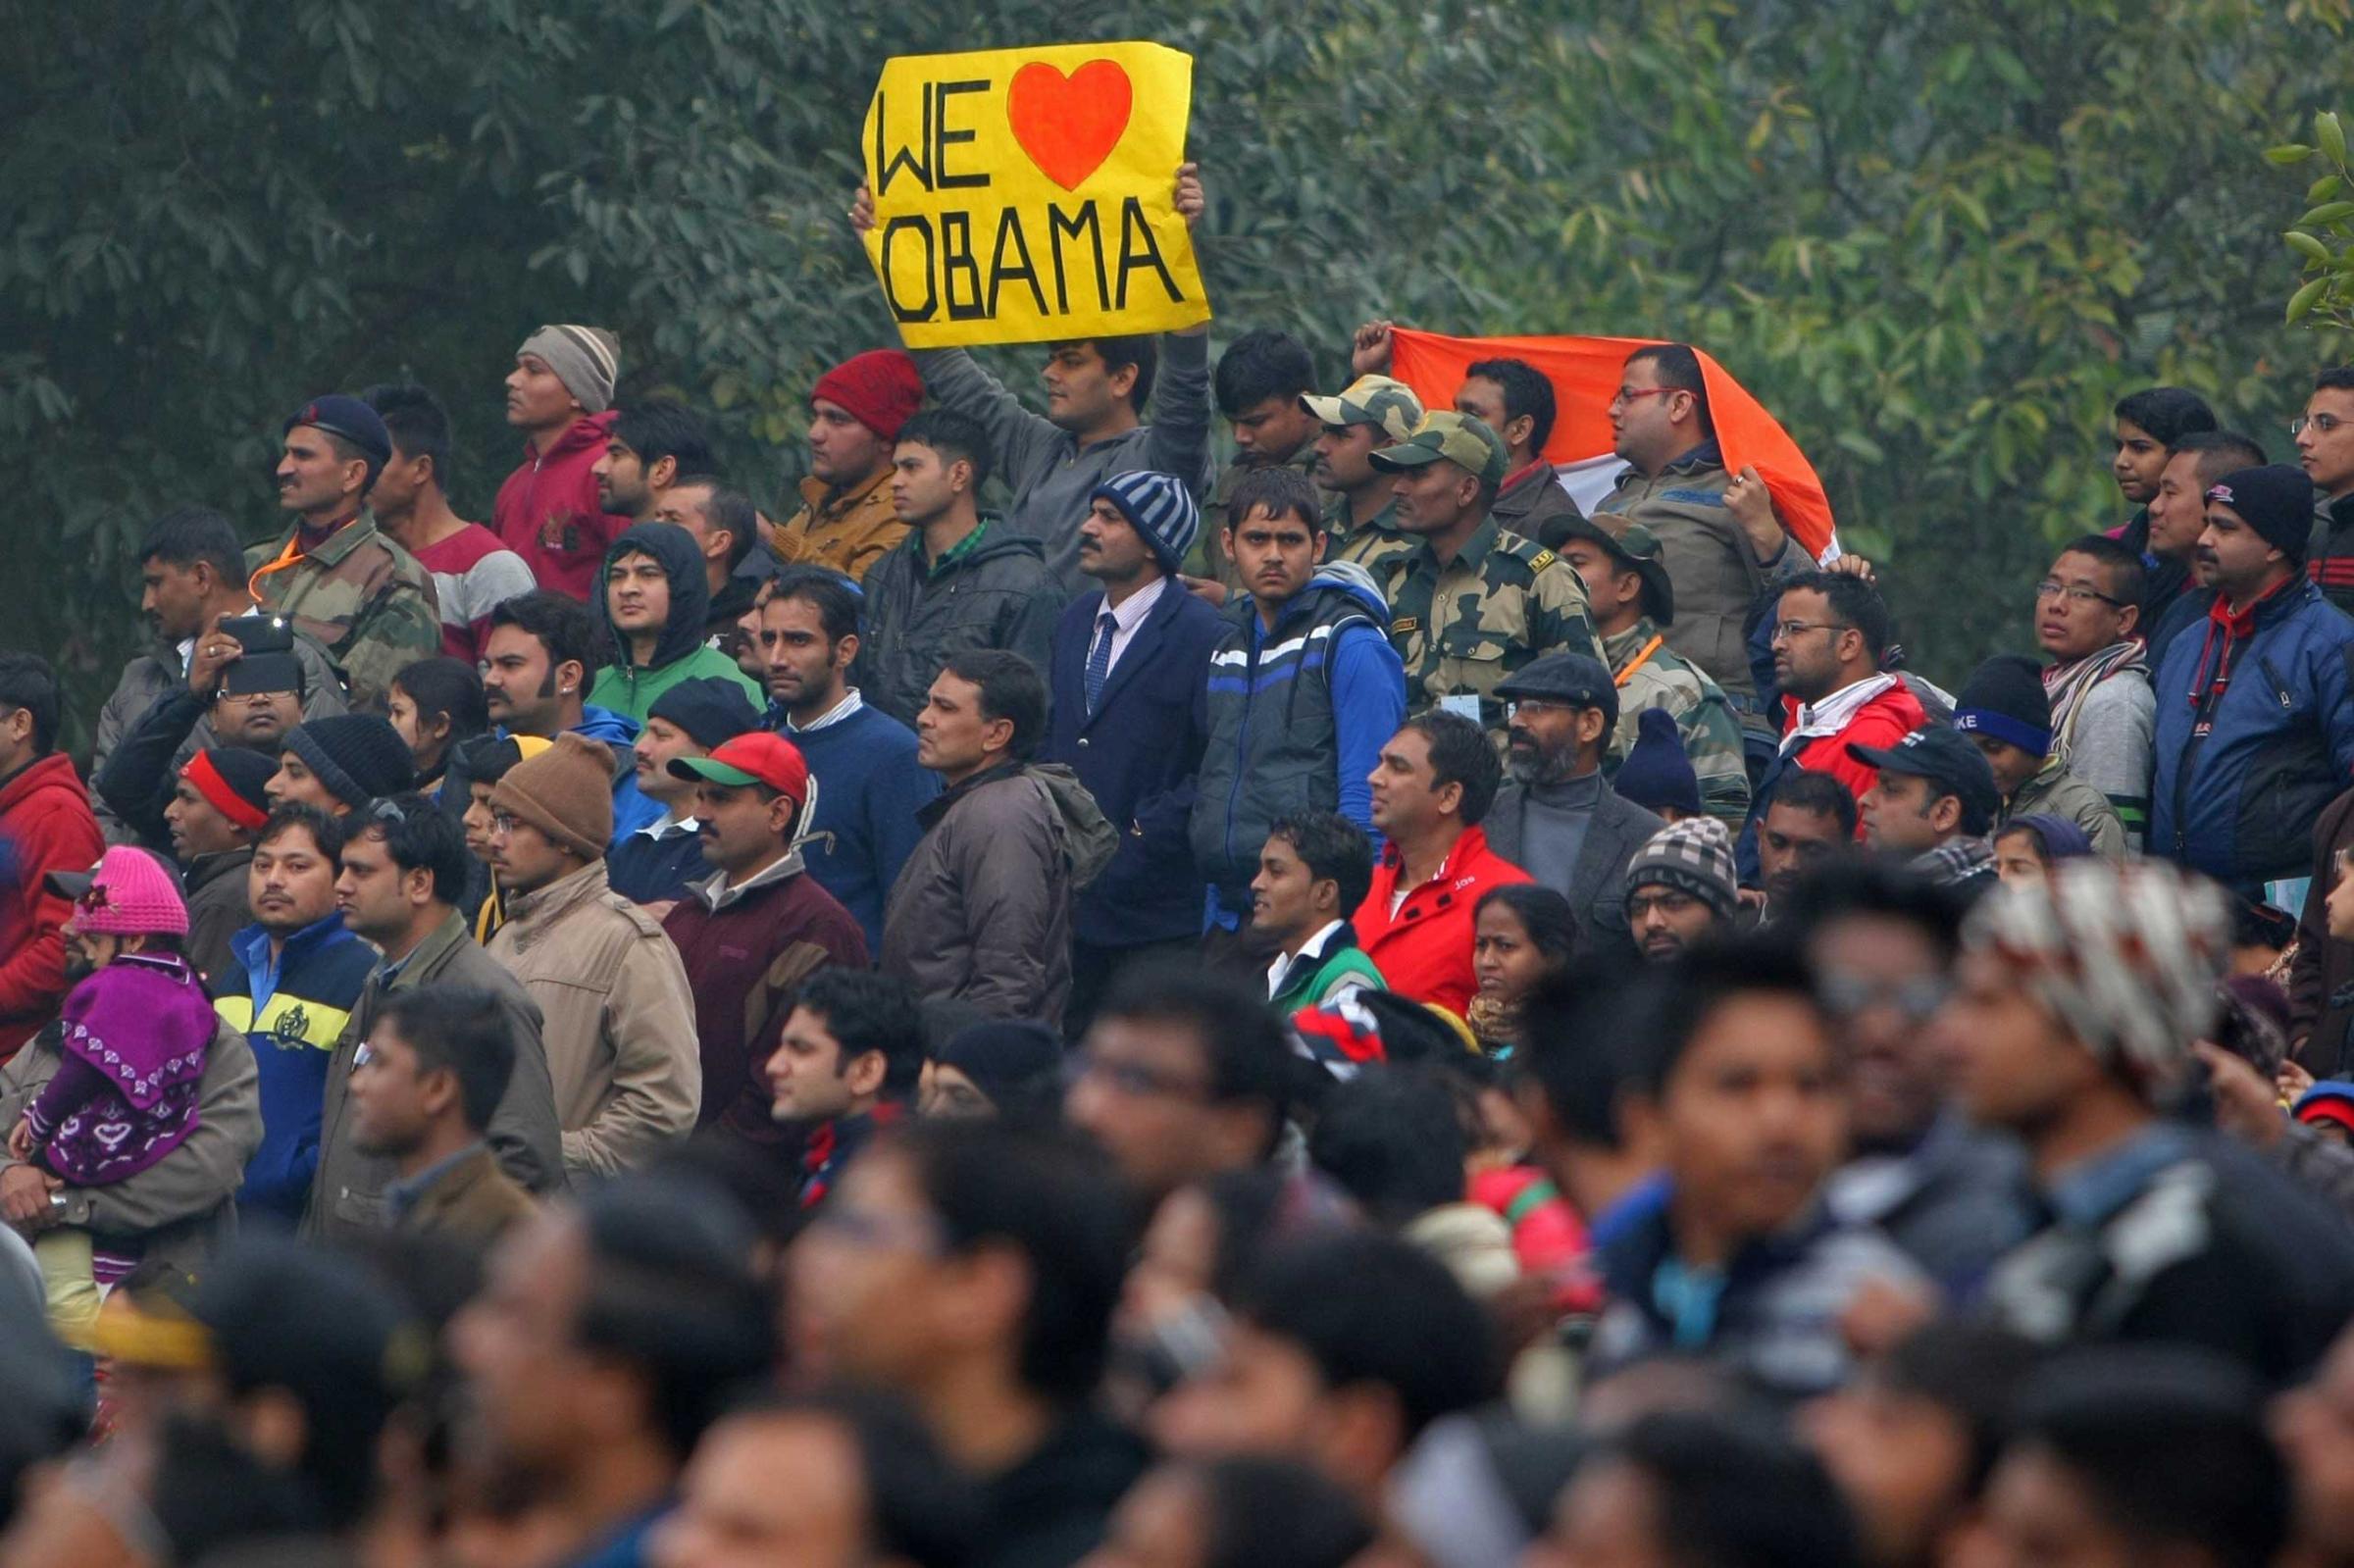 A spectator holds a placard that reads "We Love Obama" as the motorcade of President Obama departs following the conclusion of the country's Republic Day Parade in New Delhi on Jan. 26, 2015.